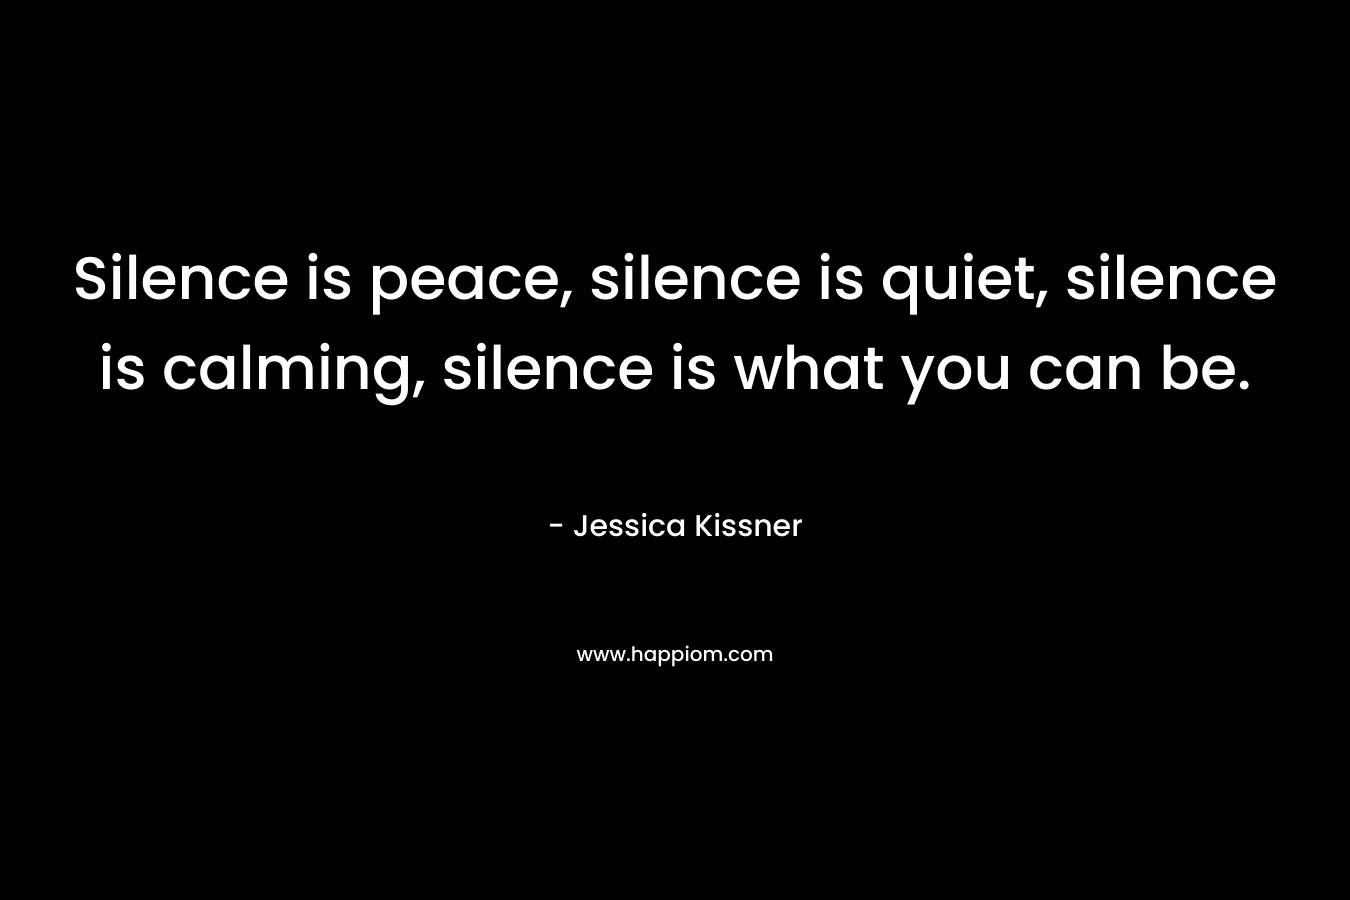 Silence is peace, silence is quiet, silence is calming, silence is what you can be.